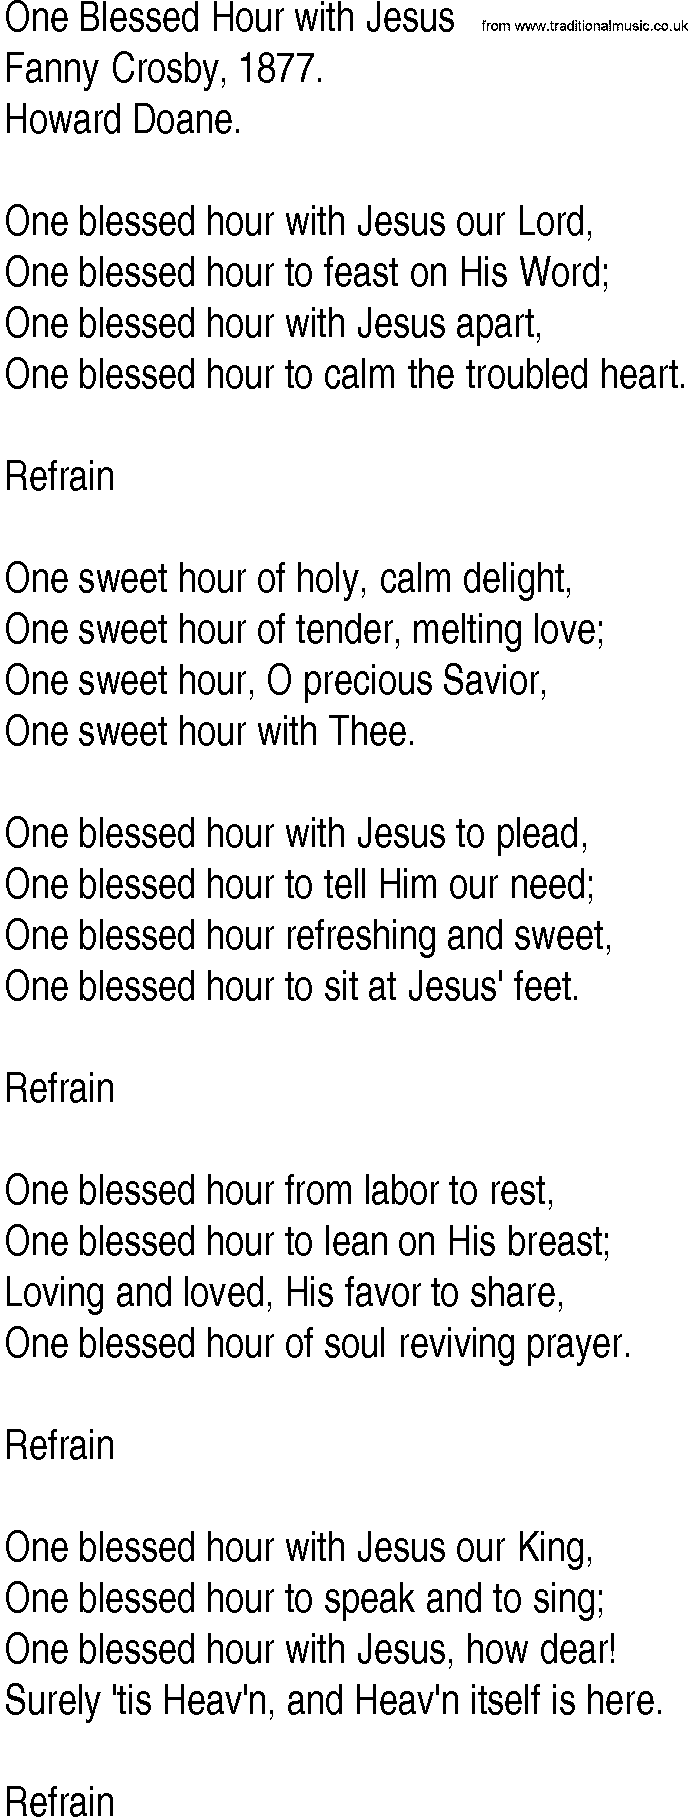 Hymn and Gospel Song: One Blessed Hour with Jesus by Fanny Crosby lyrics